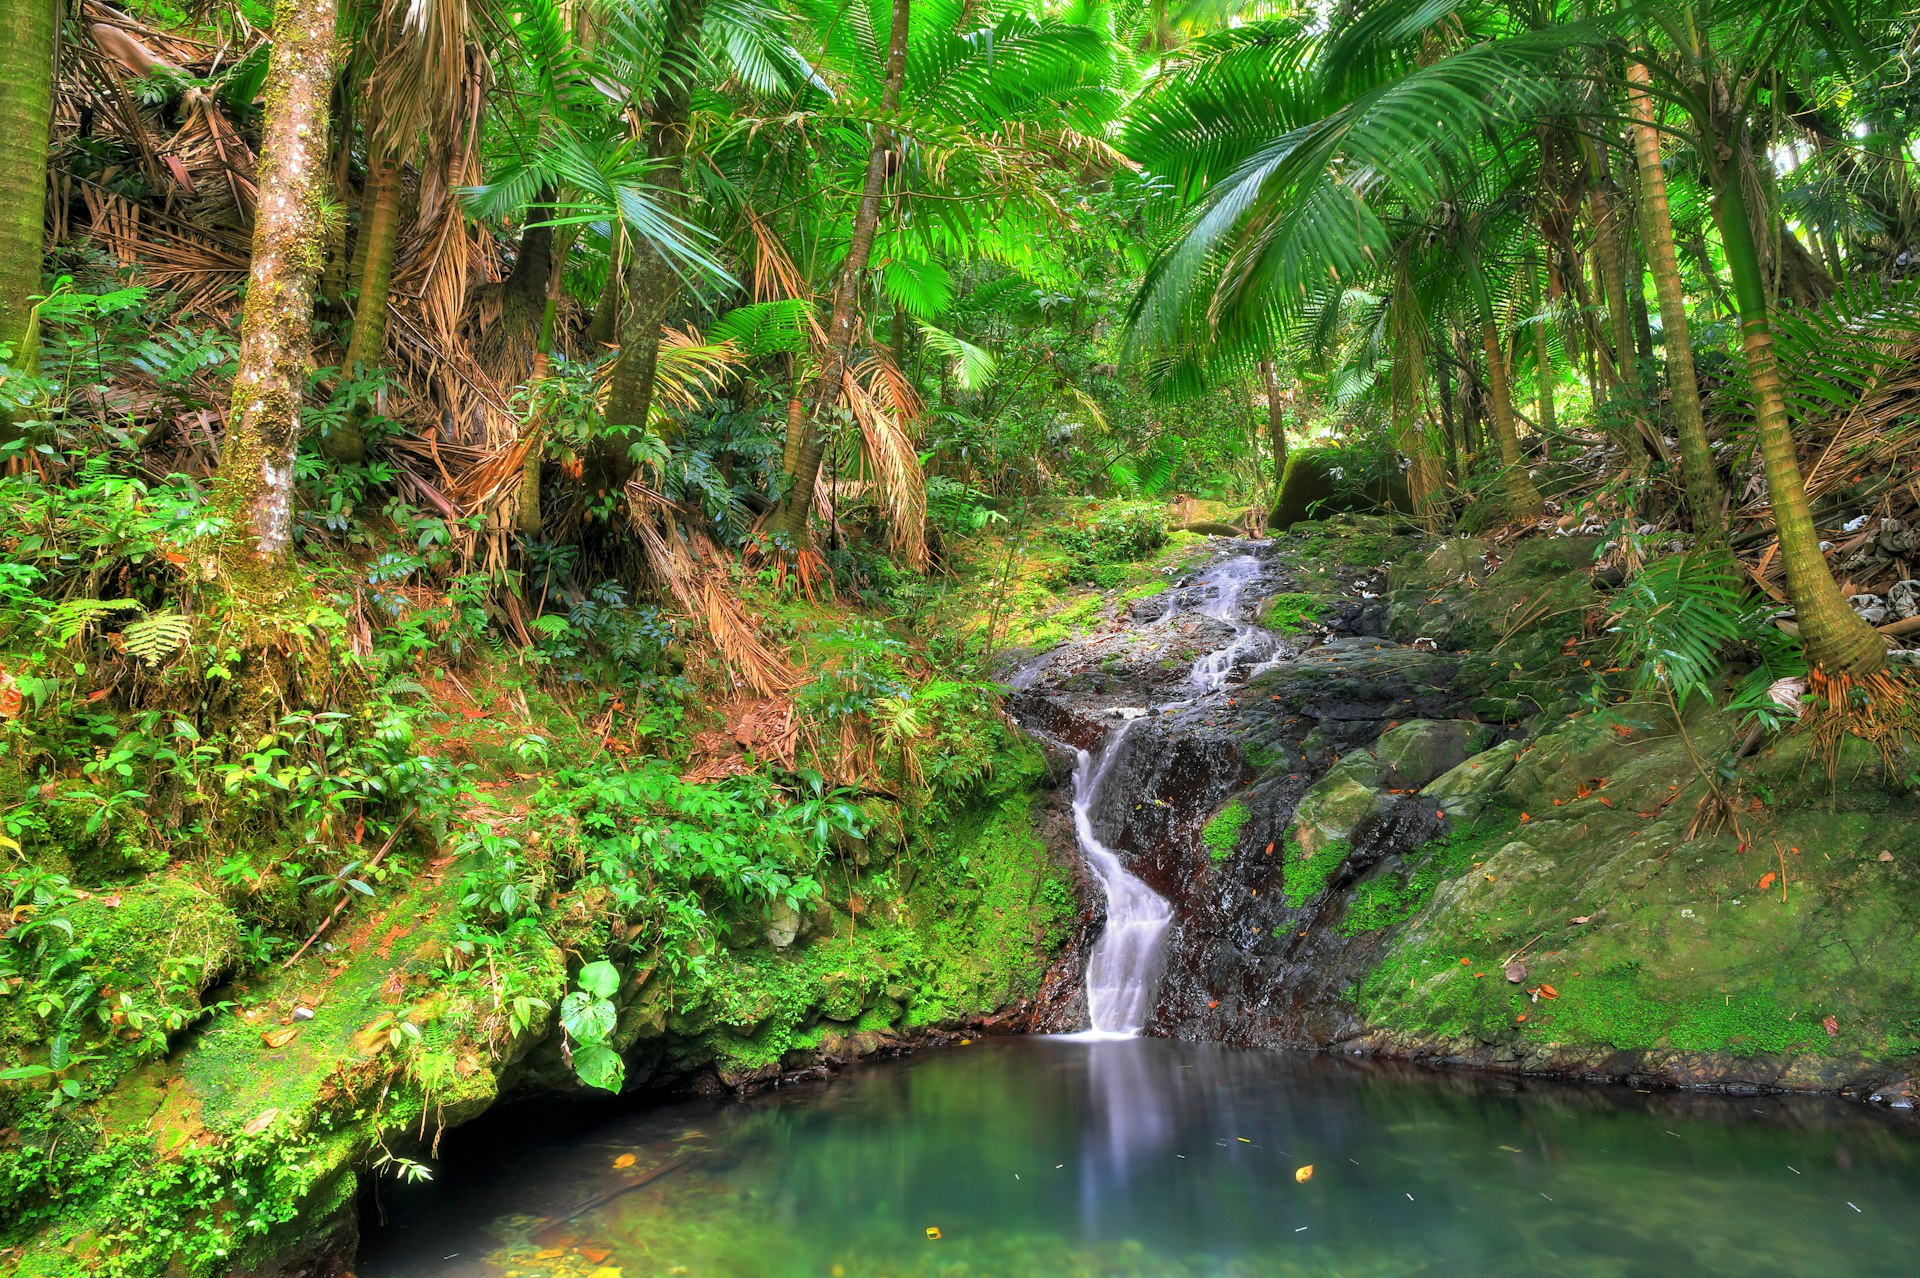 A small cascade trickles down mossy rocks into a pool in El Yunque National Forest, Puerto Rico